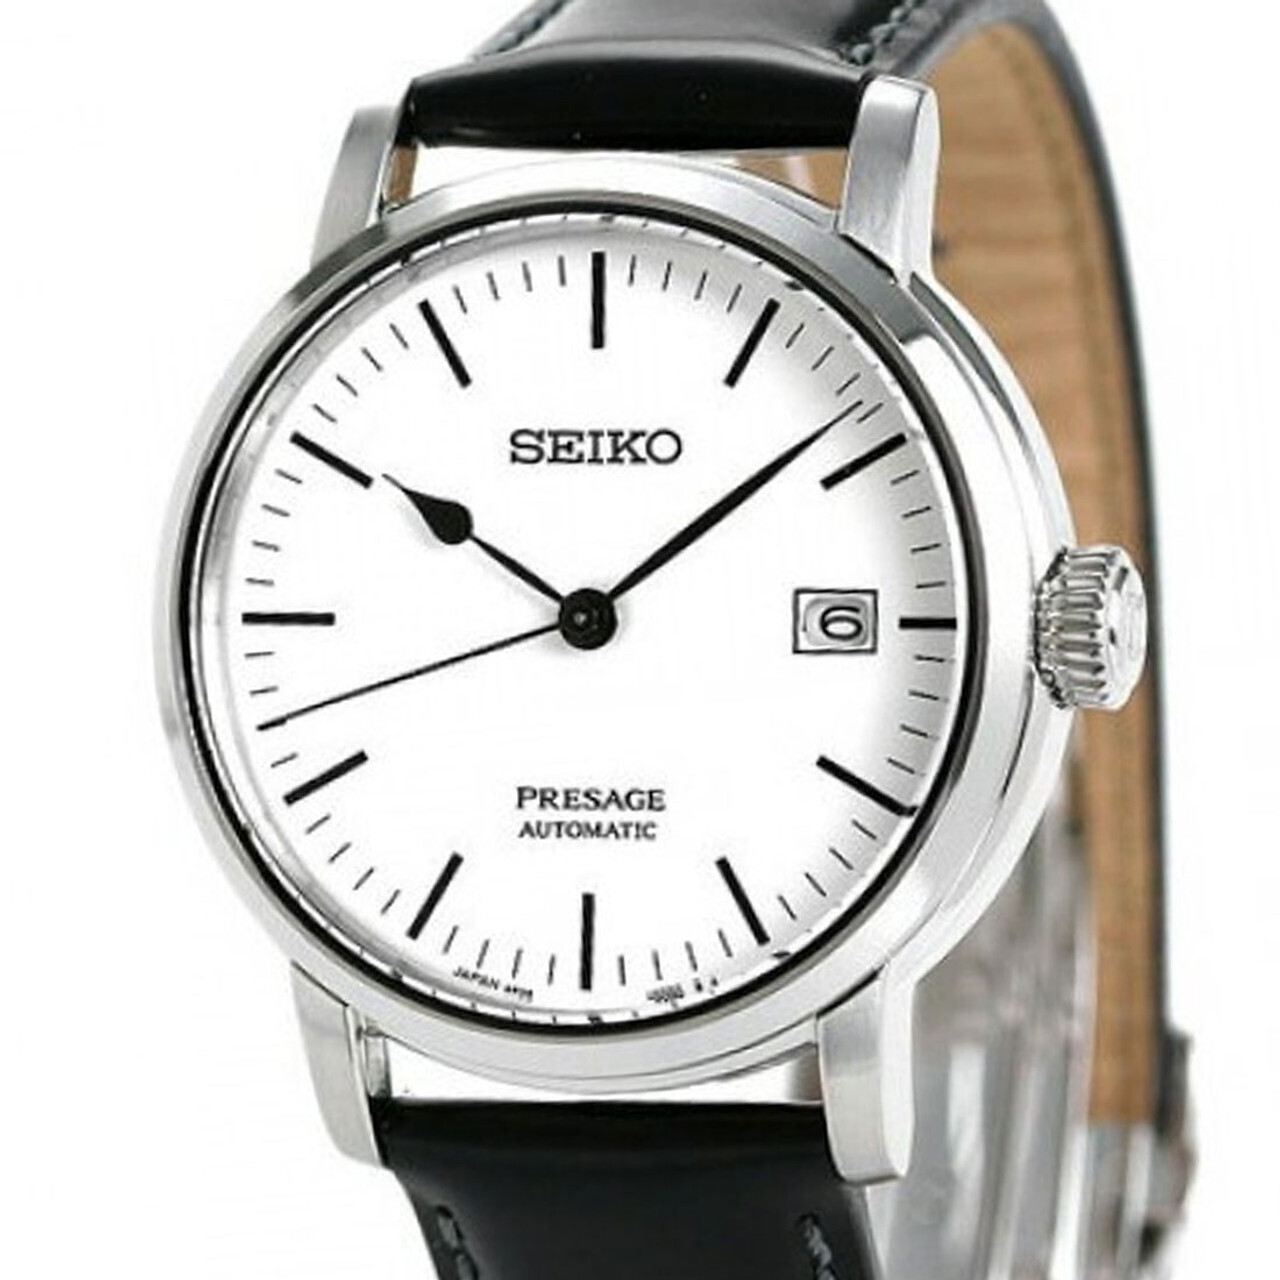 Seiko Presage Riki Watanabe SPB113J1 Automatic White Enamel 39.9mm dial Japan Made 100M automatic men's watch horse leather band Sapphire glass double curvature